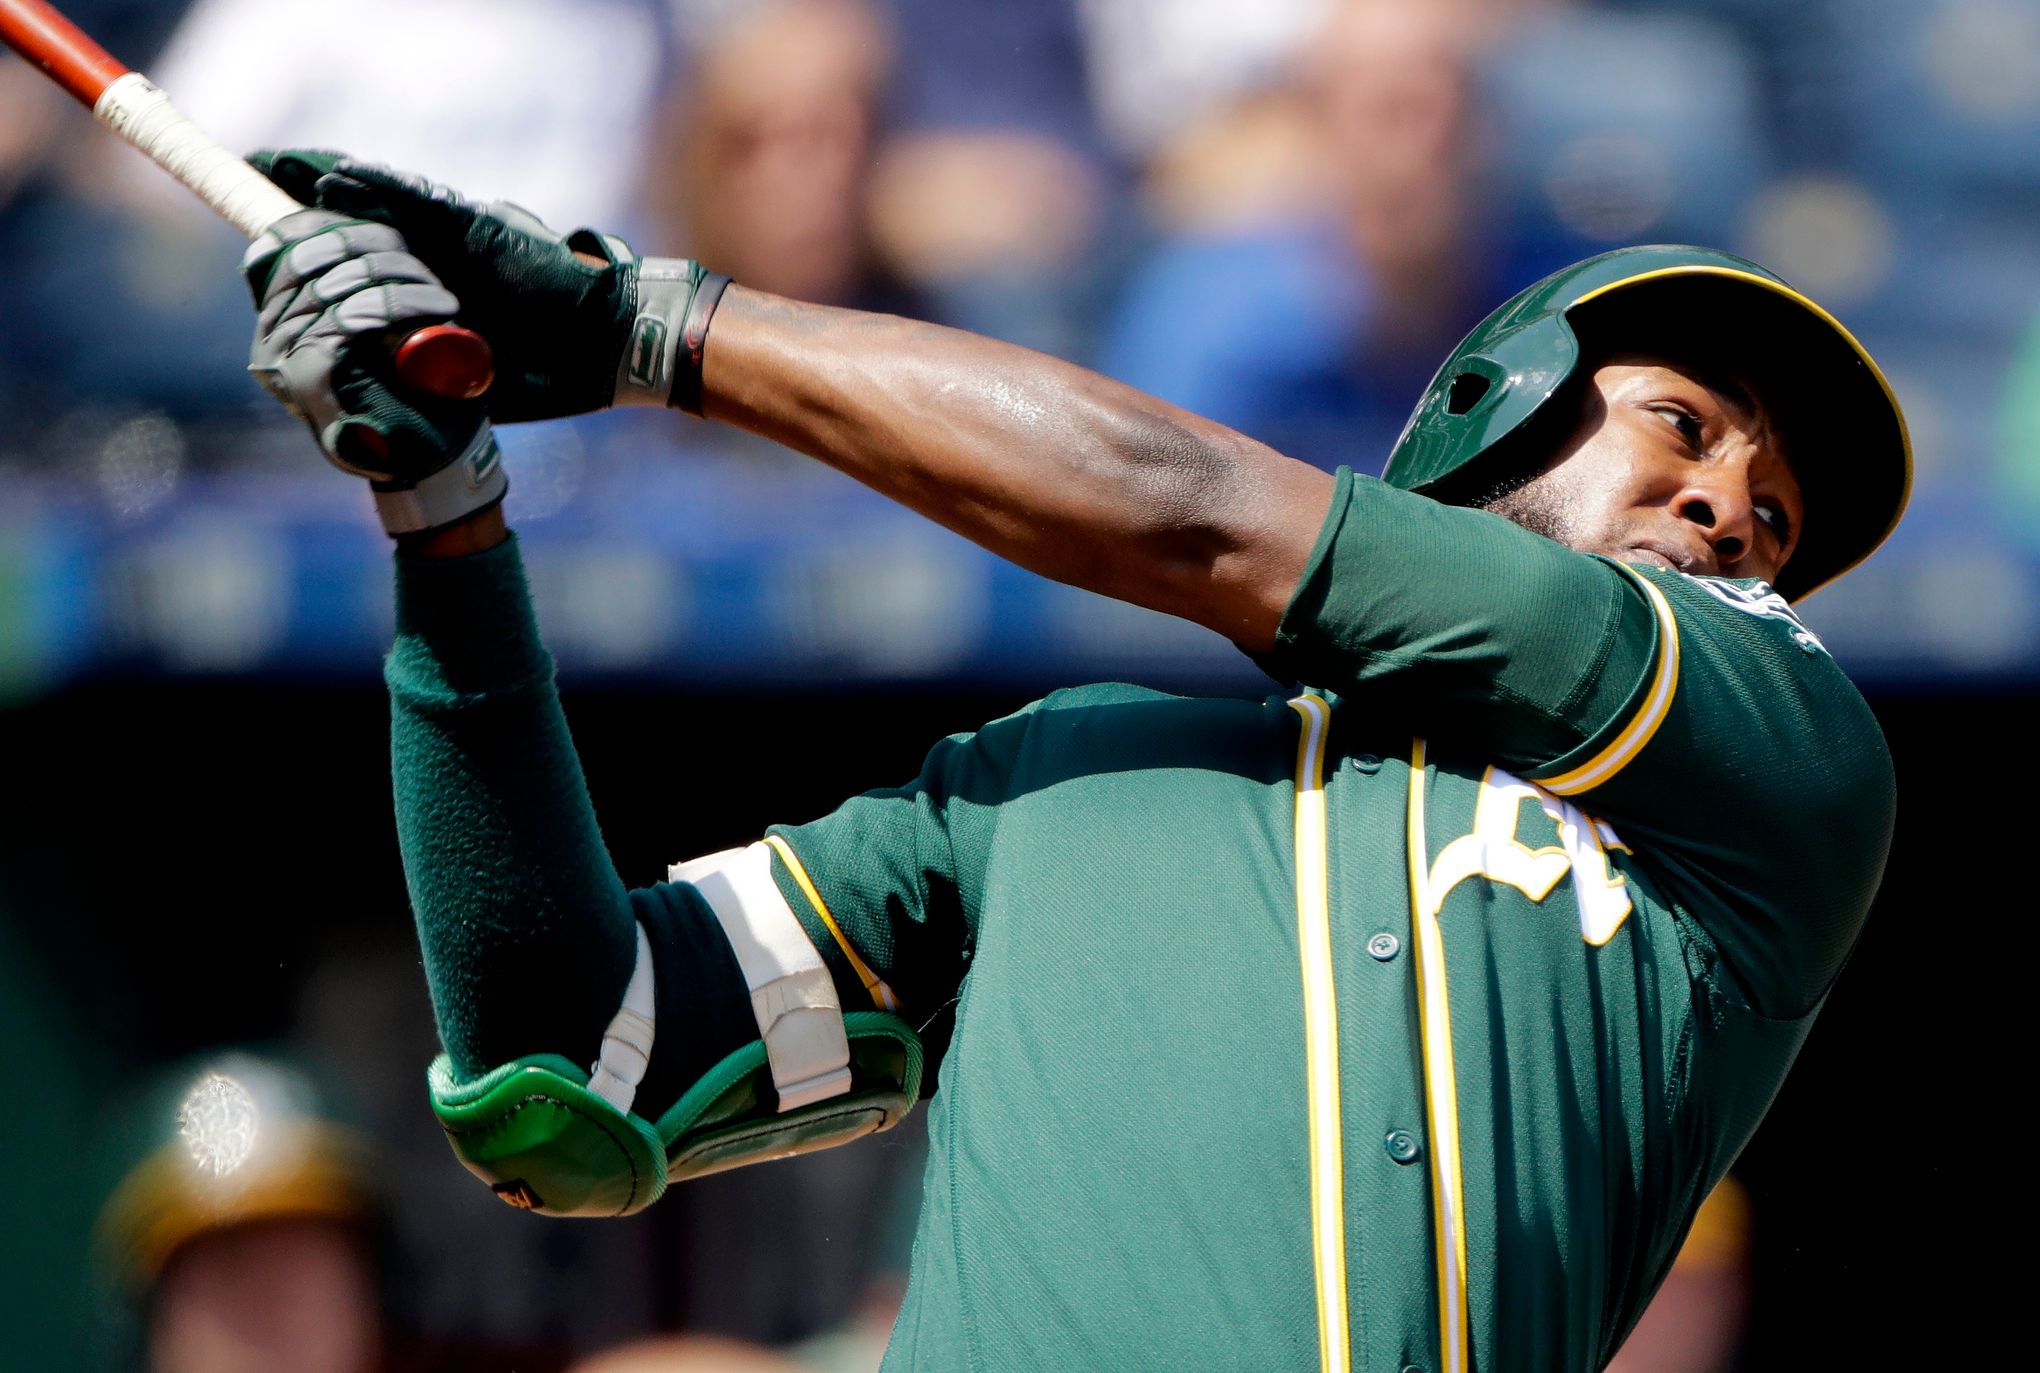 Padres Acquire INF Jurickson Profar From Oakland Athletics In Exchange For  C Austin Allen, by FriarWire